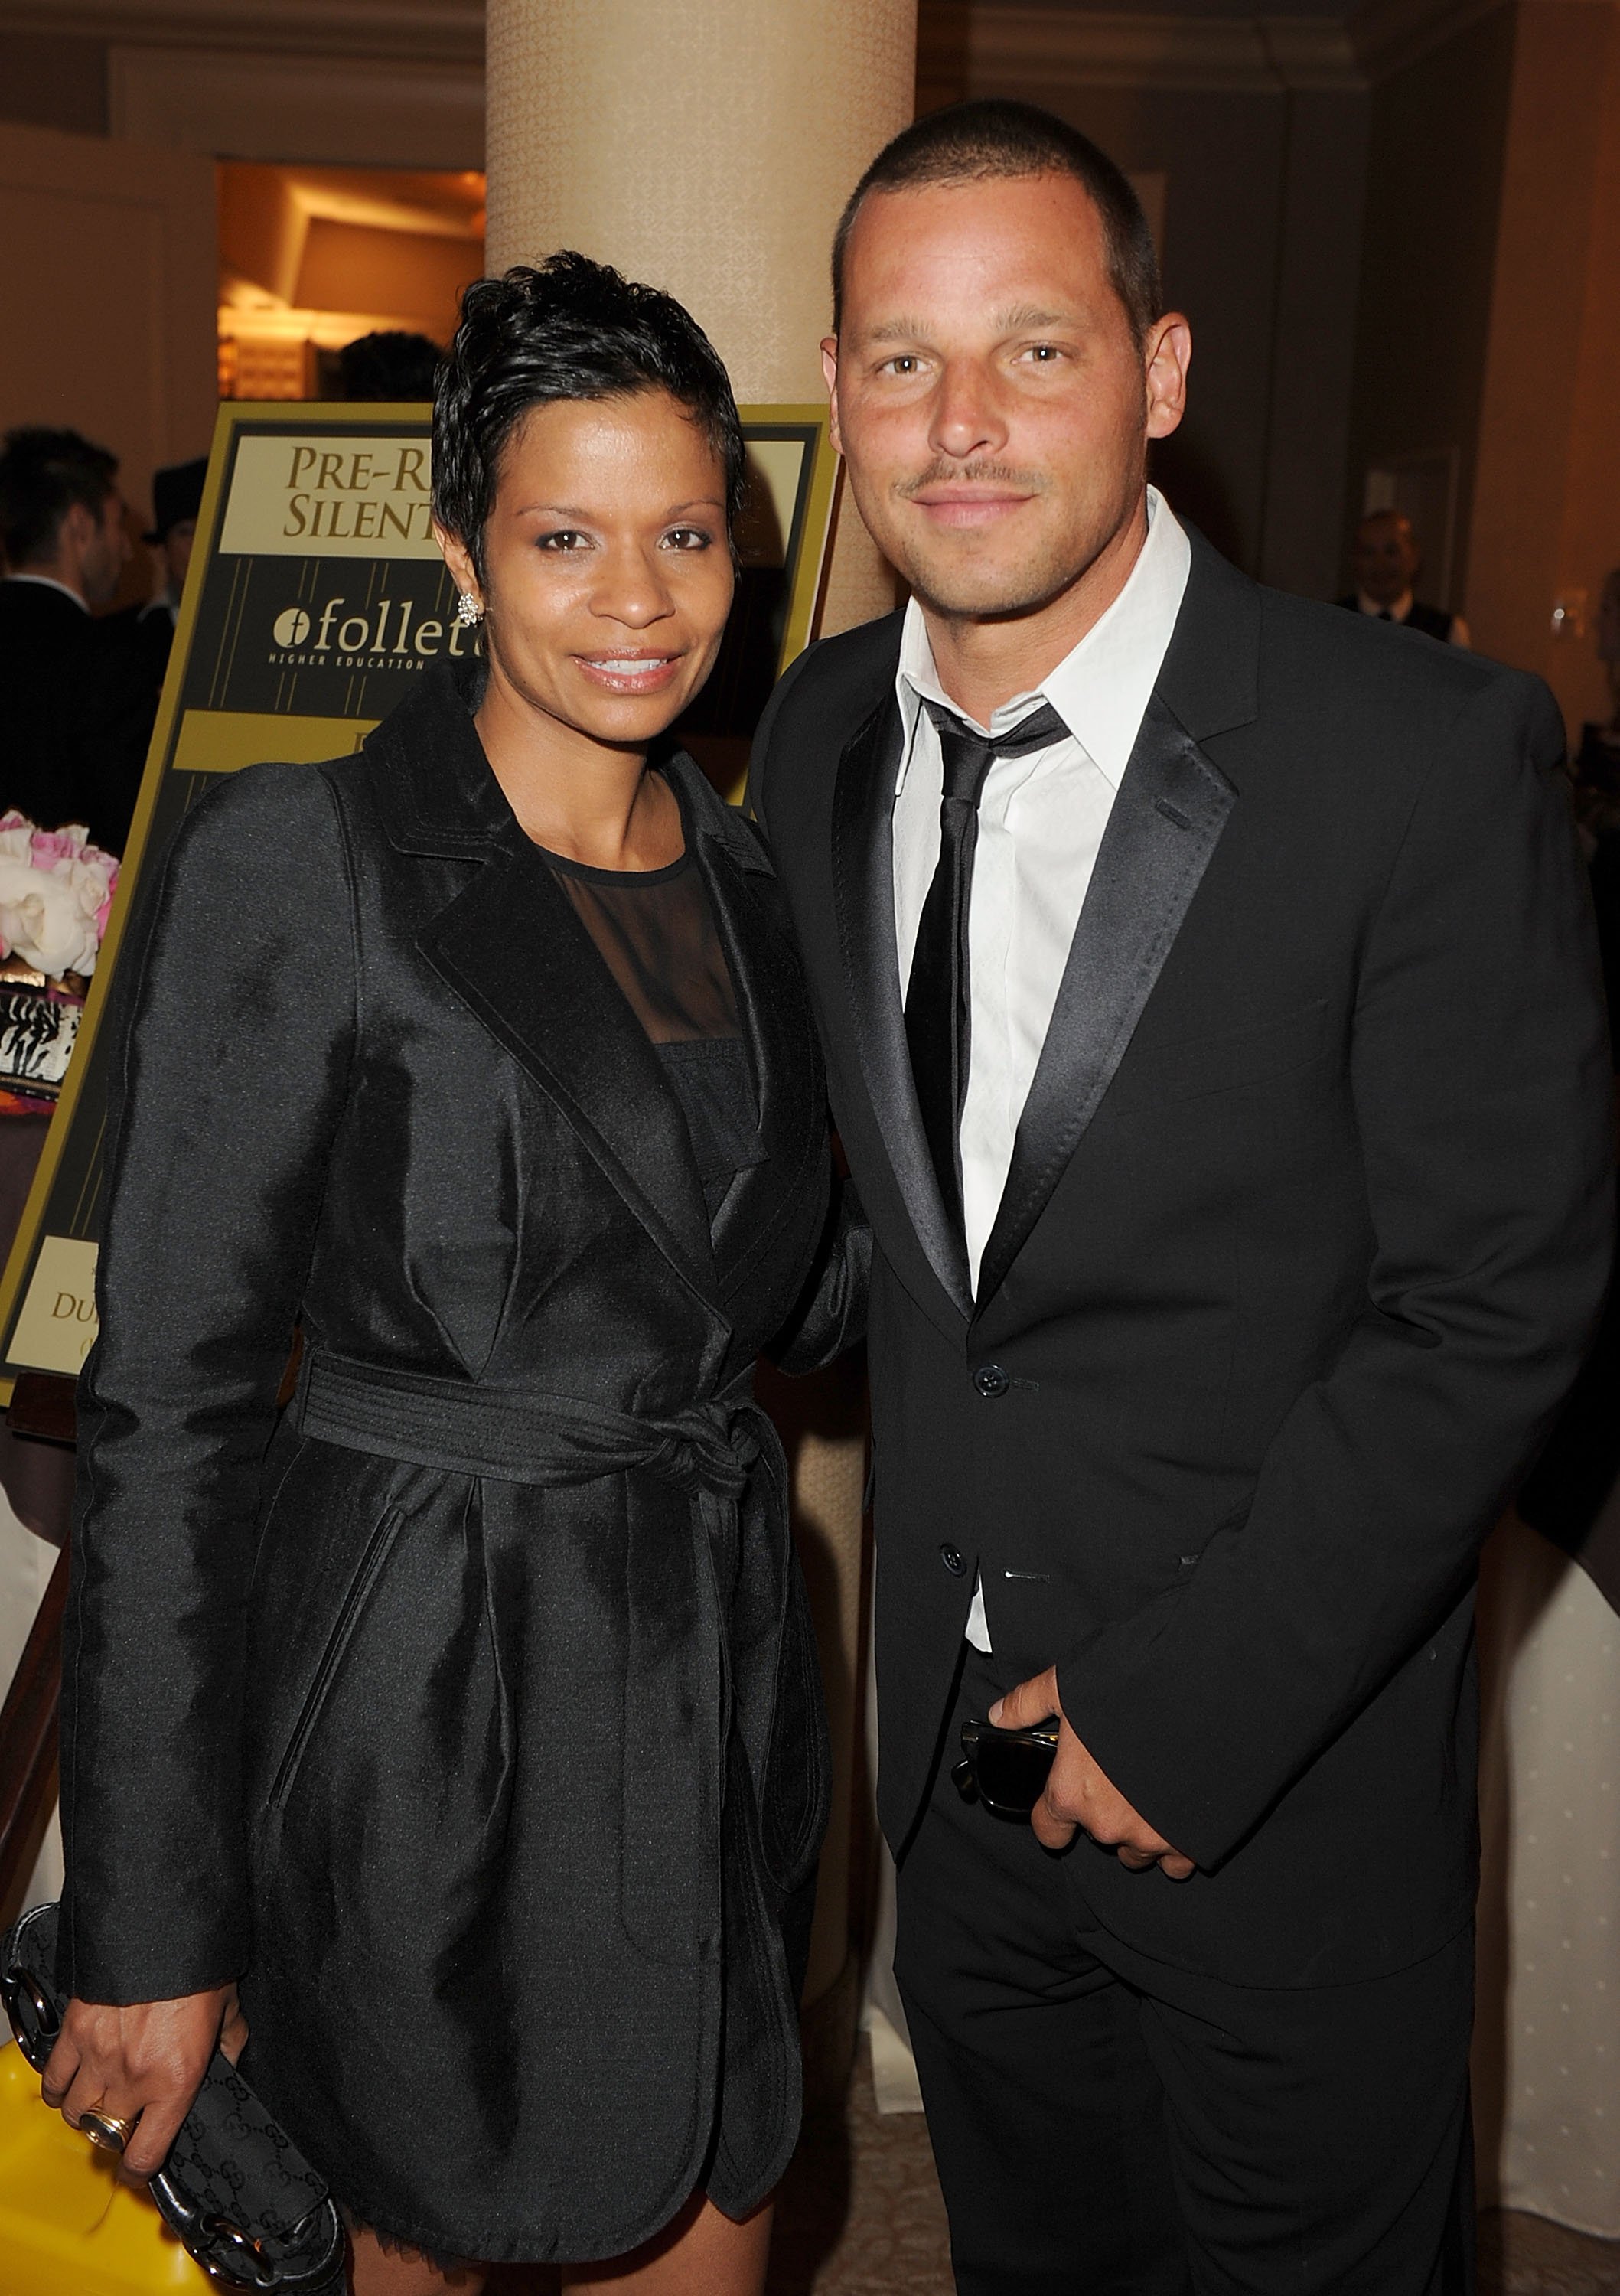 Justin Chambers and his wife Keisha Chambers on June 28, 2011 in Beverly Hills, California | Source: Getty Images